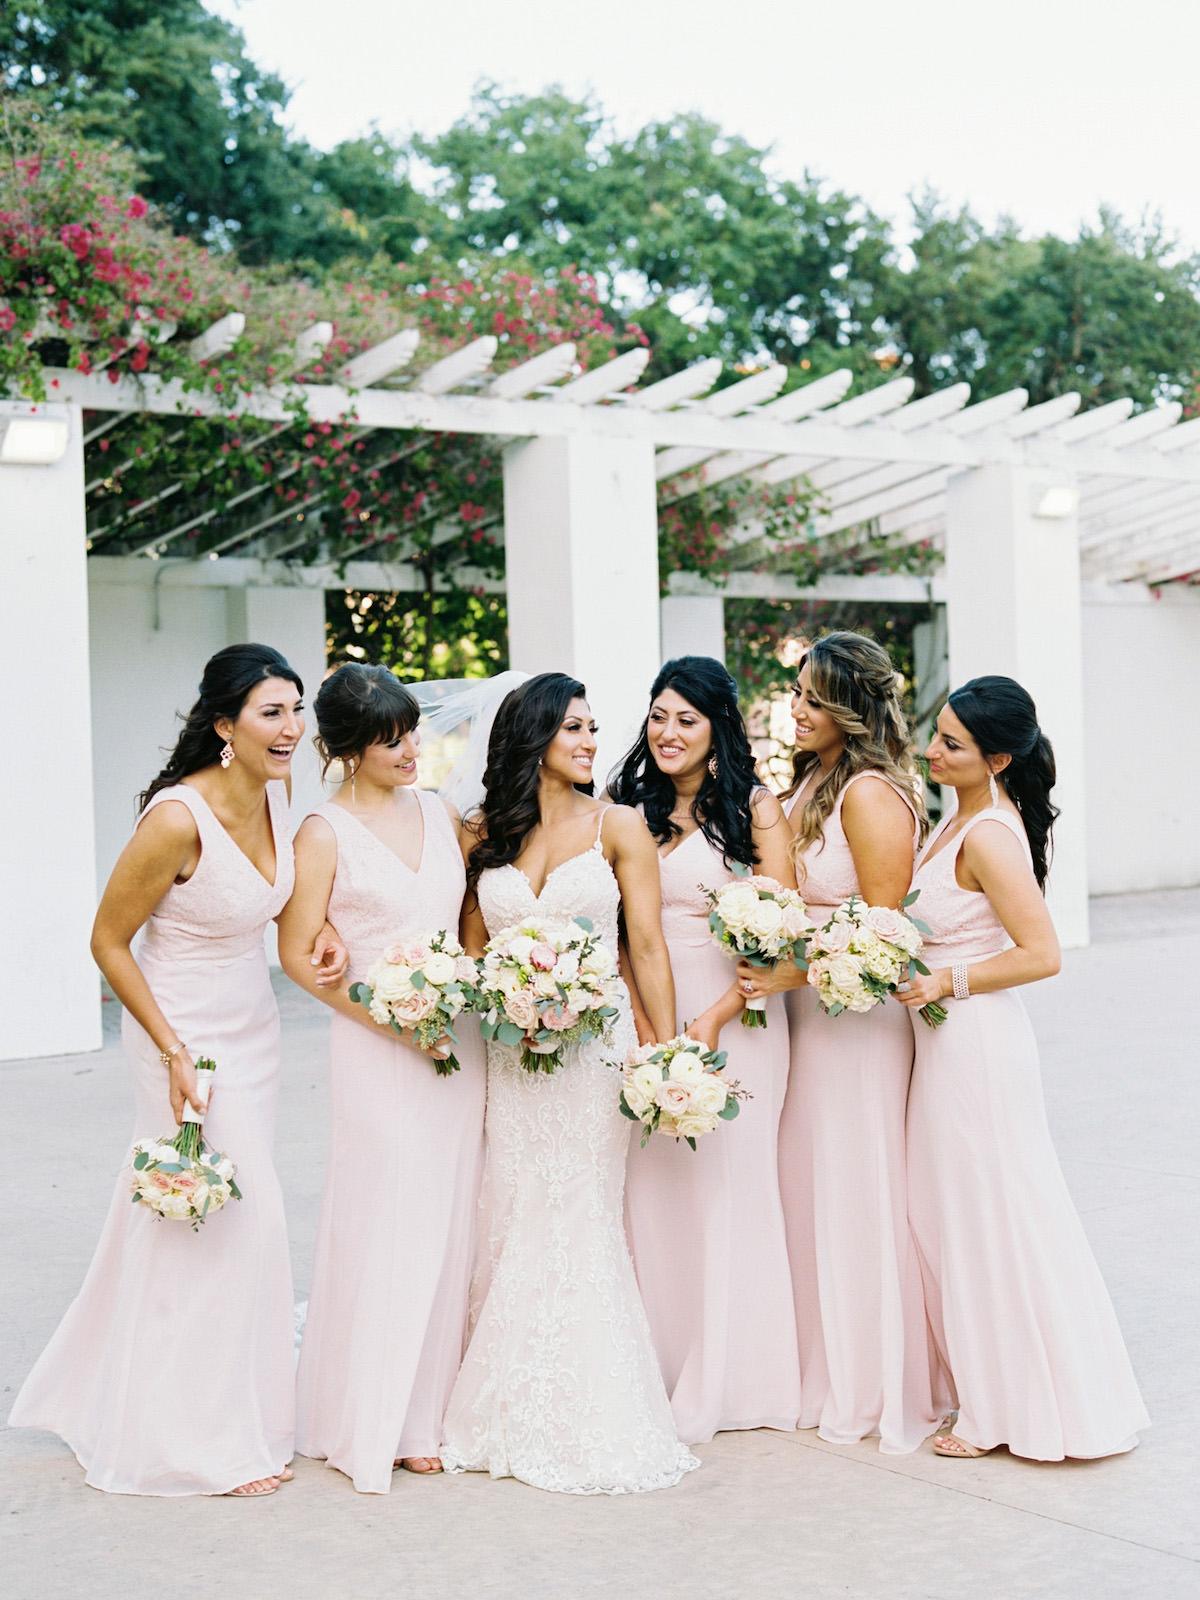 Bride and Bridesmaids Portrait Outdoor Vinoy Park St. Pete | Blush Pink Bridesmaids Dresses with Blush and White Rose Bouquets